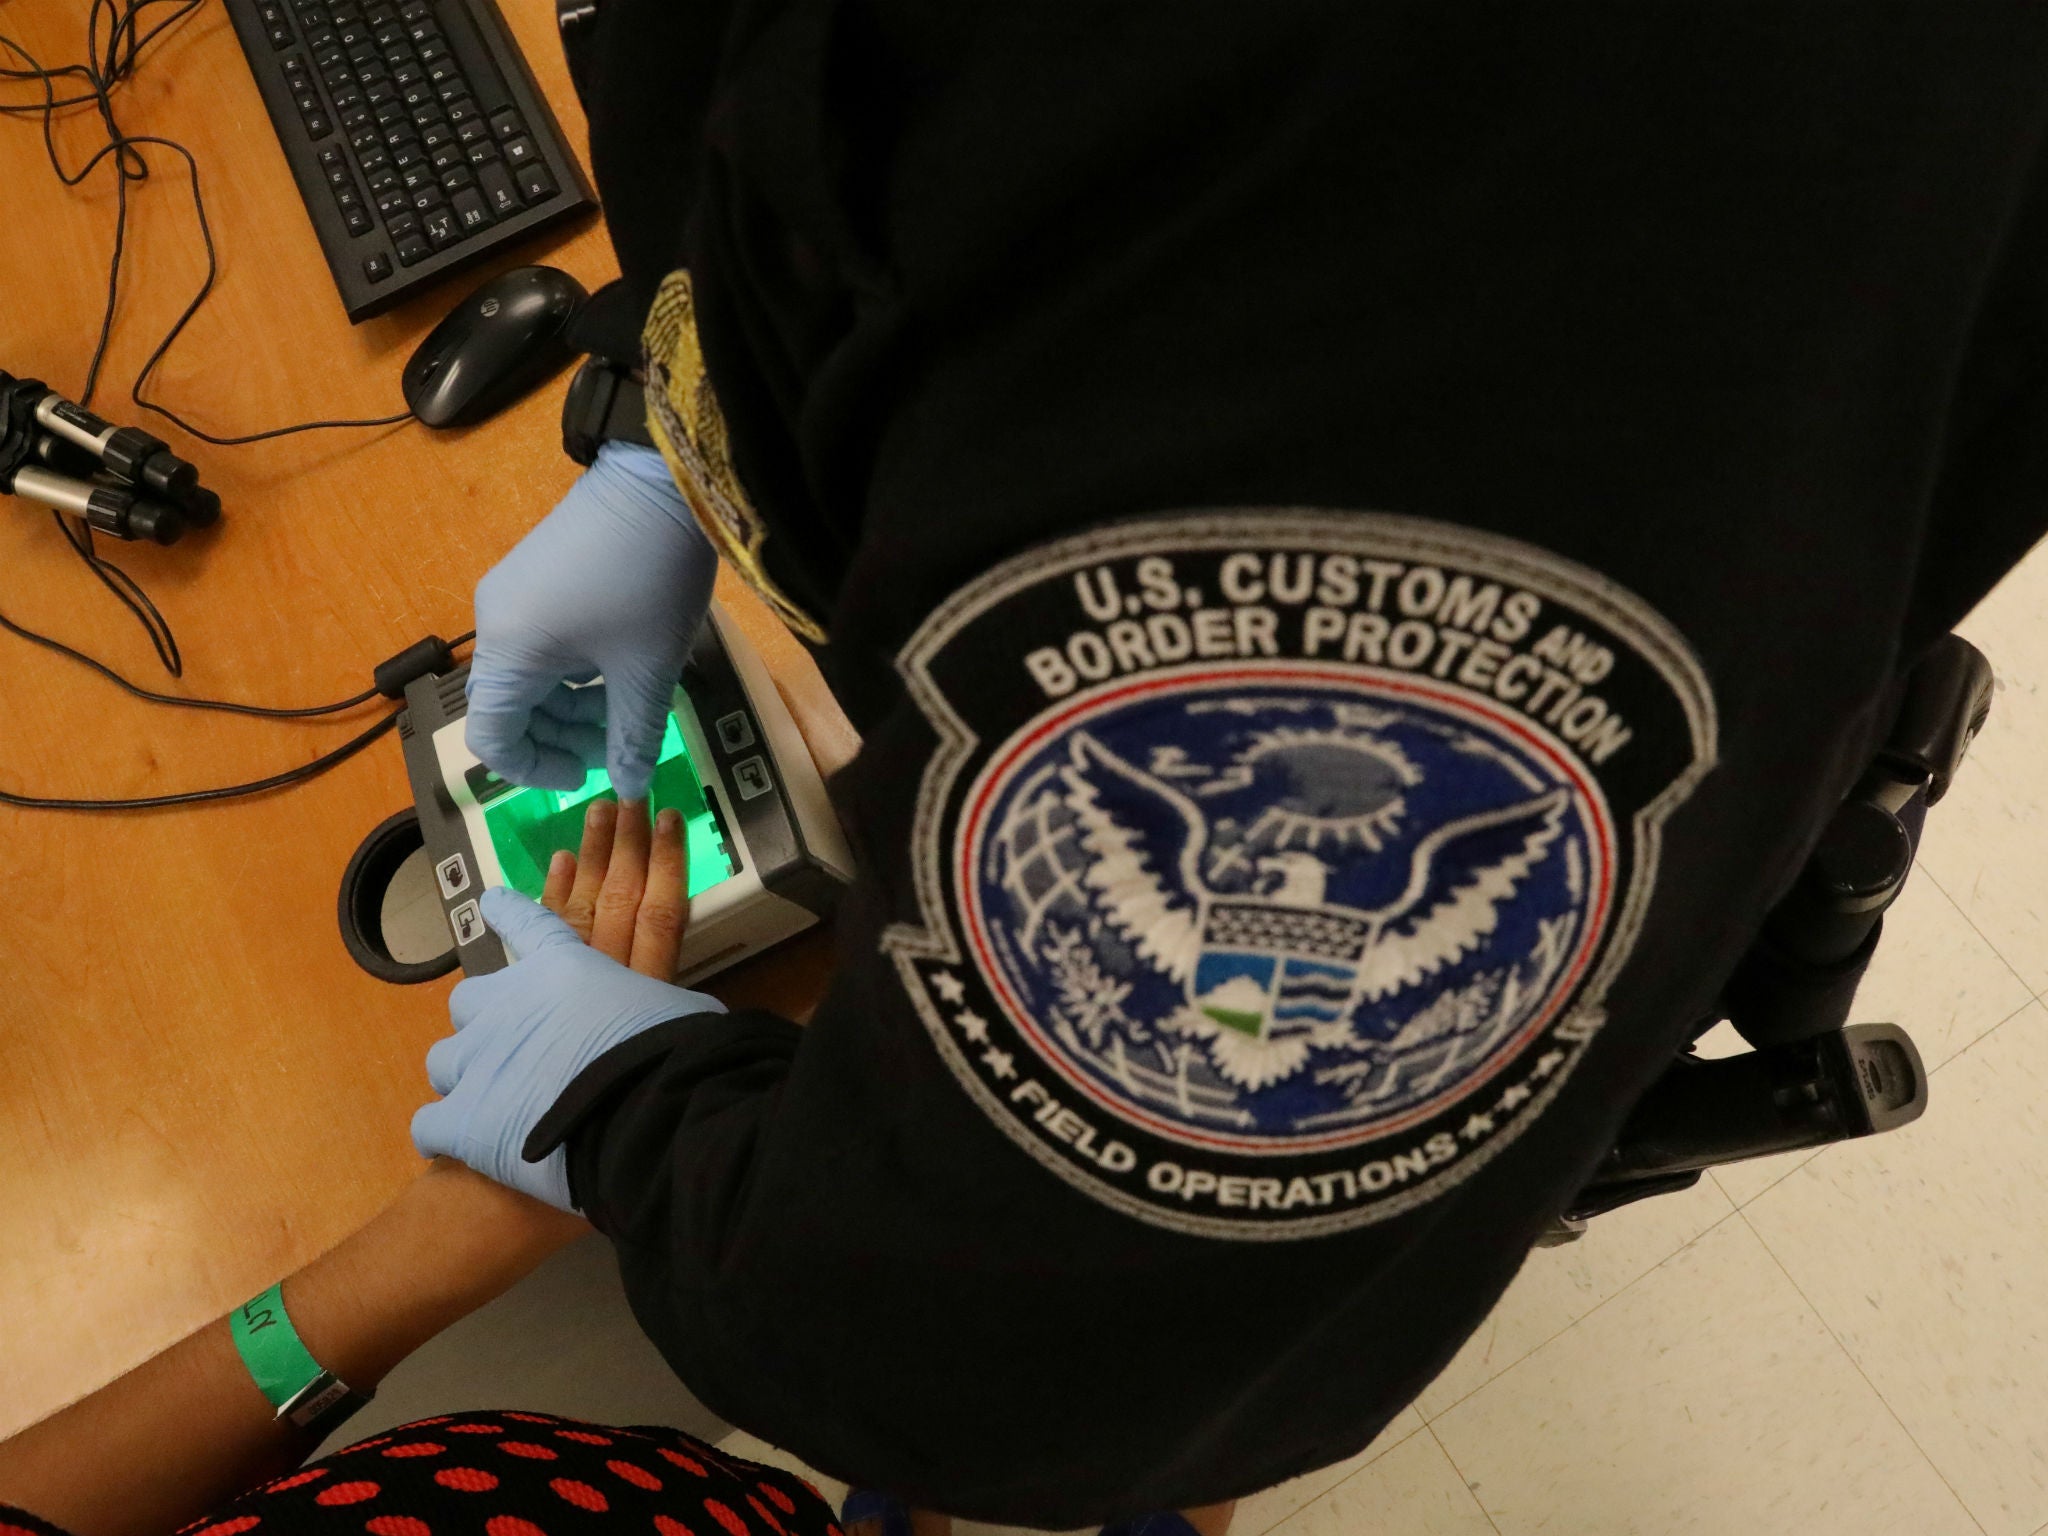 A woman who is seeking asylum has her fingerprints taken by a US Customs and Border patrol officer at a pedestrian port of entry from Mexico to the United States, in McAllen, Texas